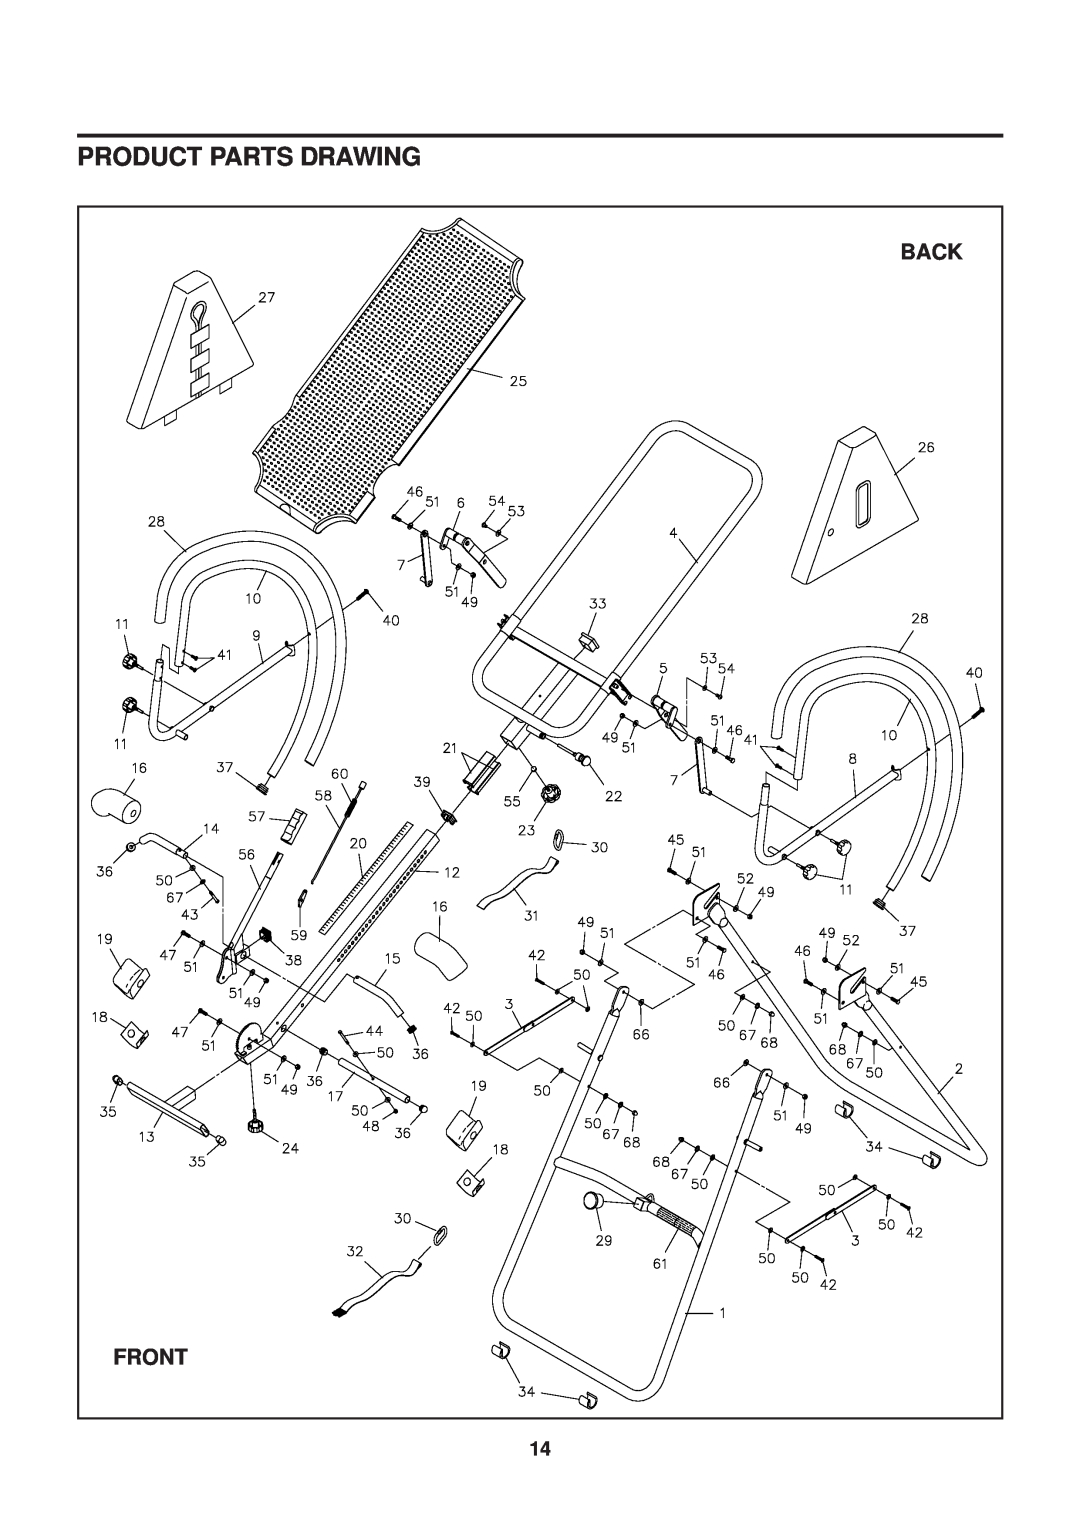 Stamina Products 55-1539A owner manual Product Parts Drawing, Back 